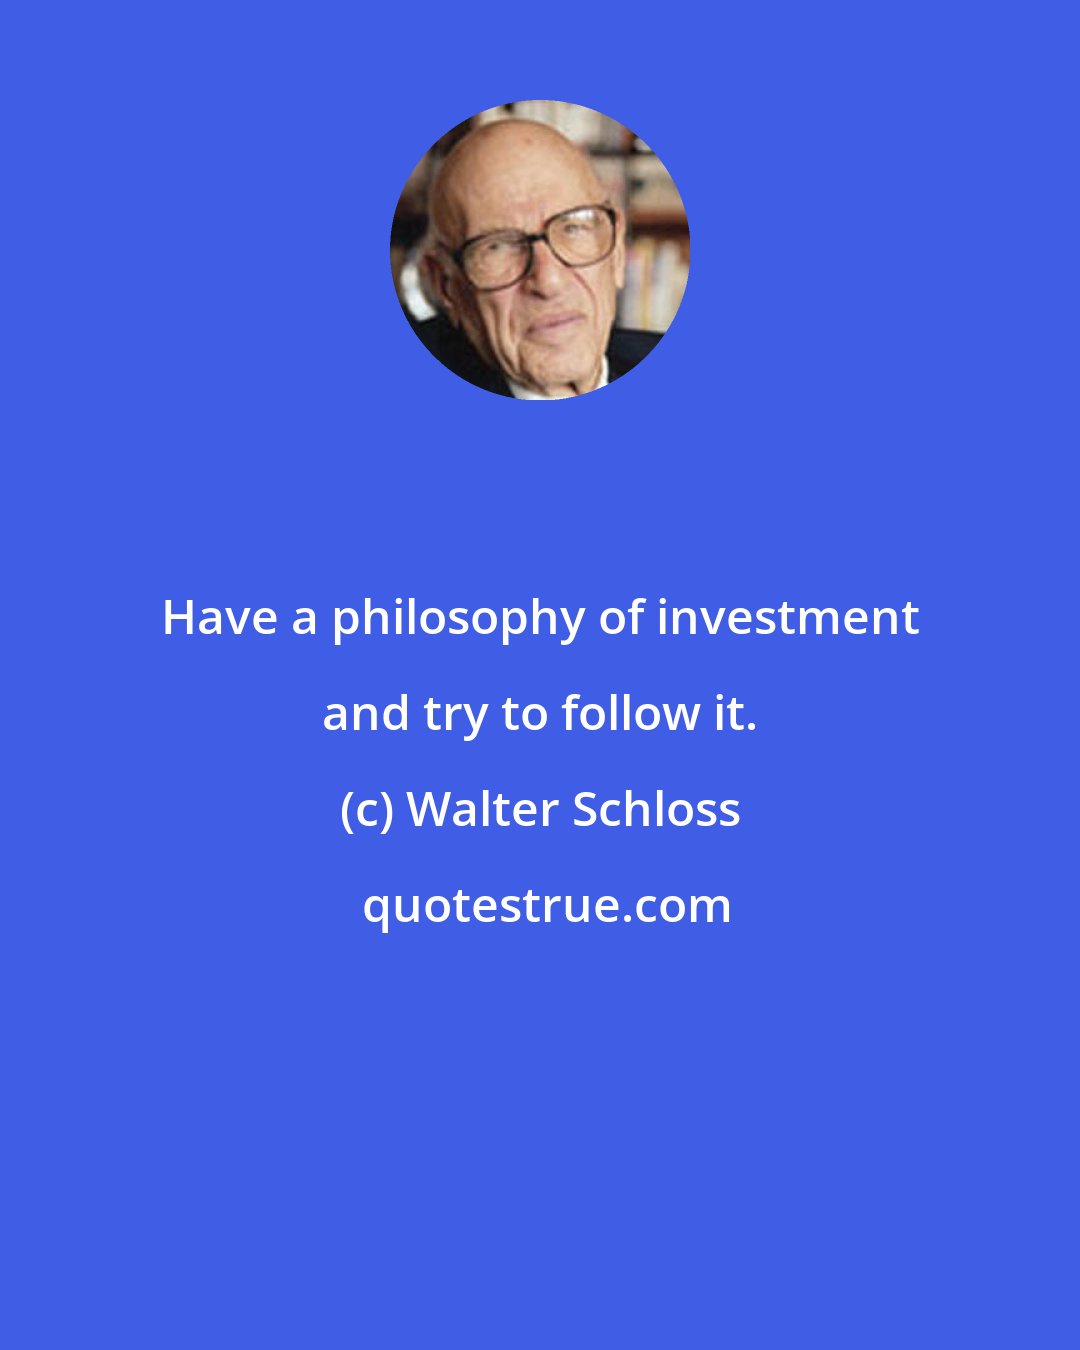 Walter Schloss: Have a philosophy of investment and try to follow it.